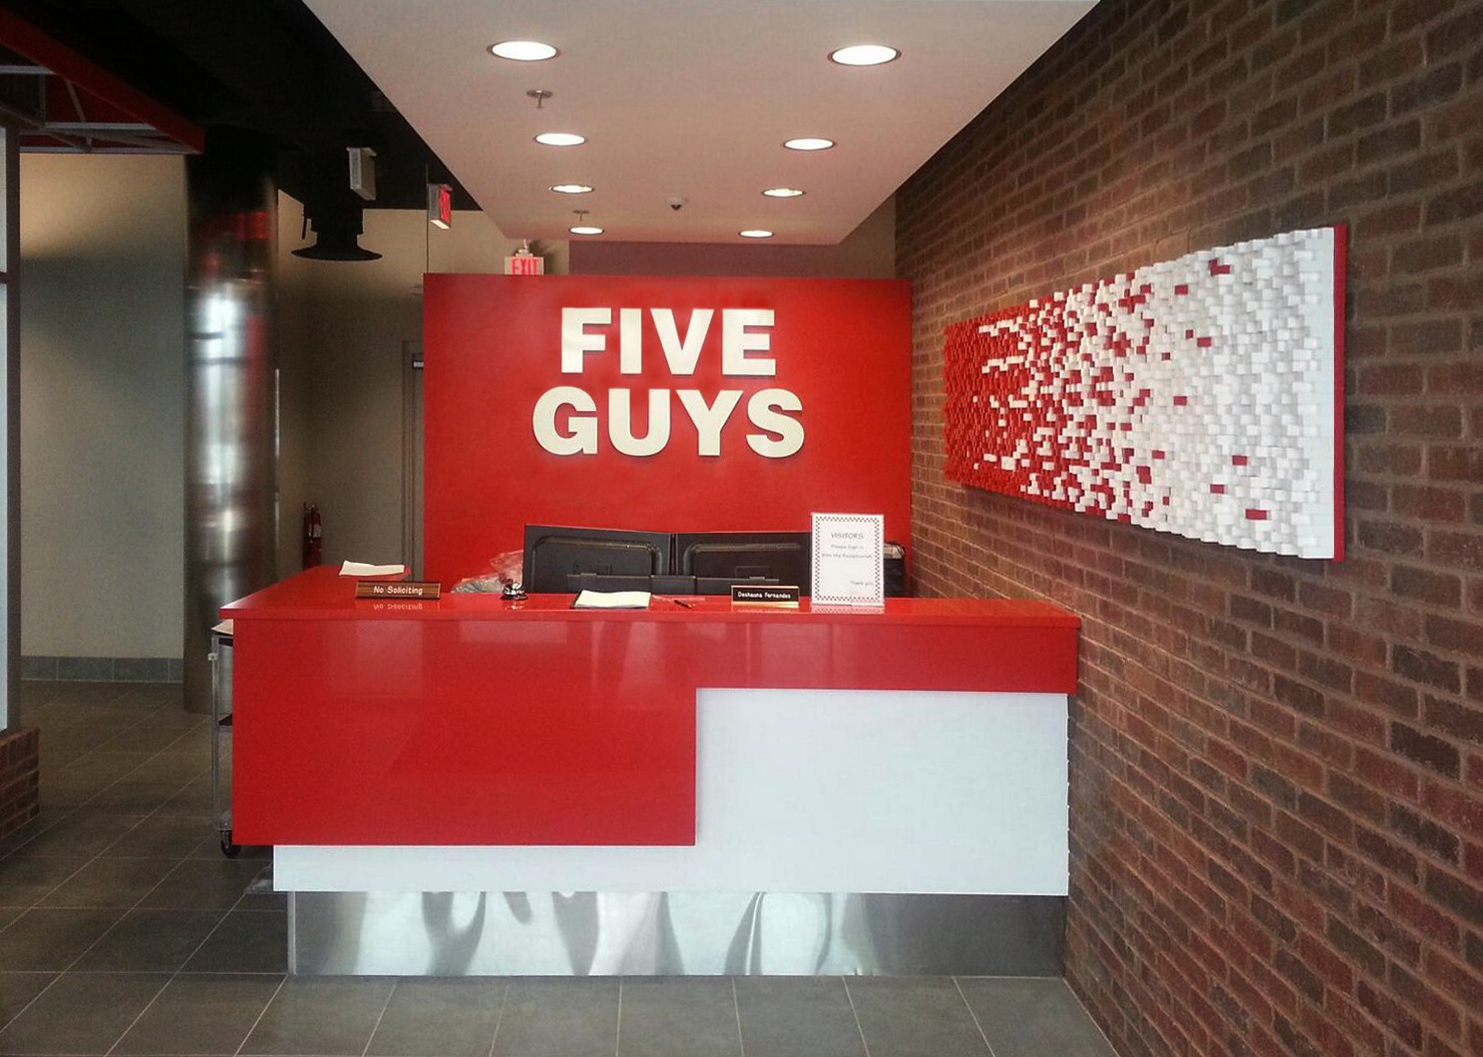 Five Guys Burgers and Fries Fry Wall Art